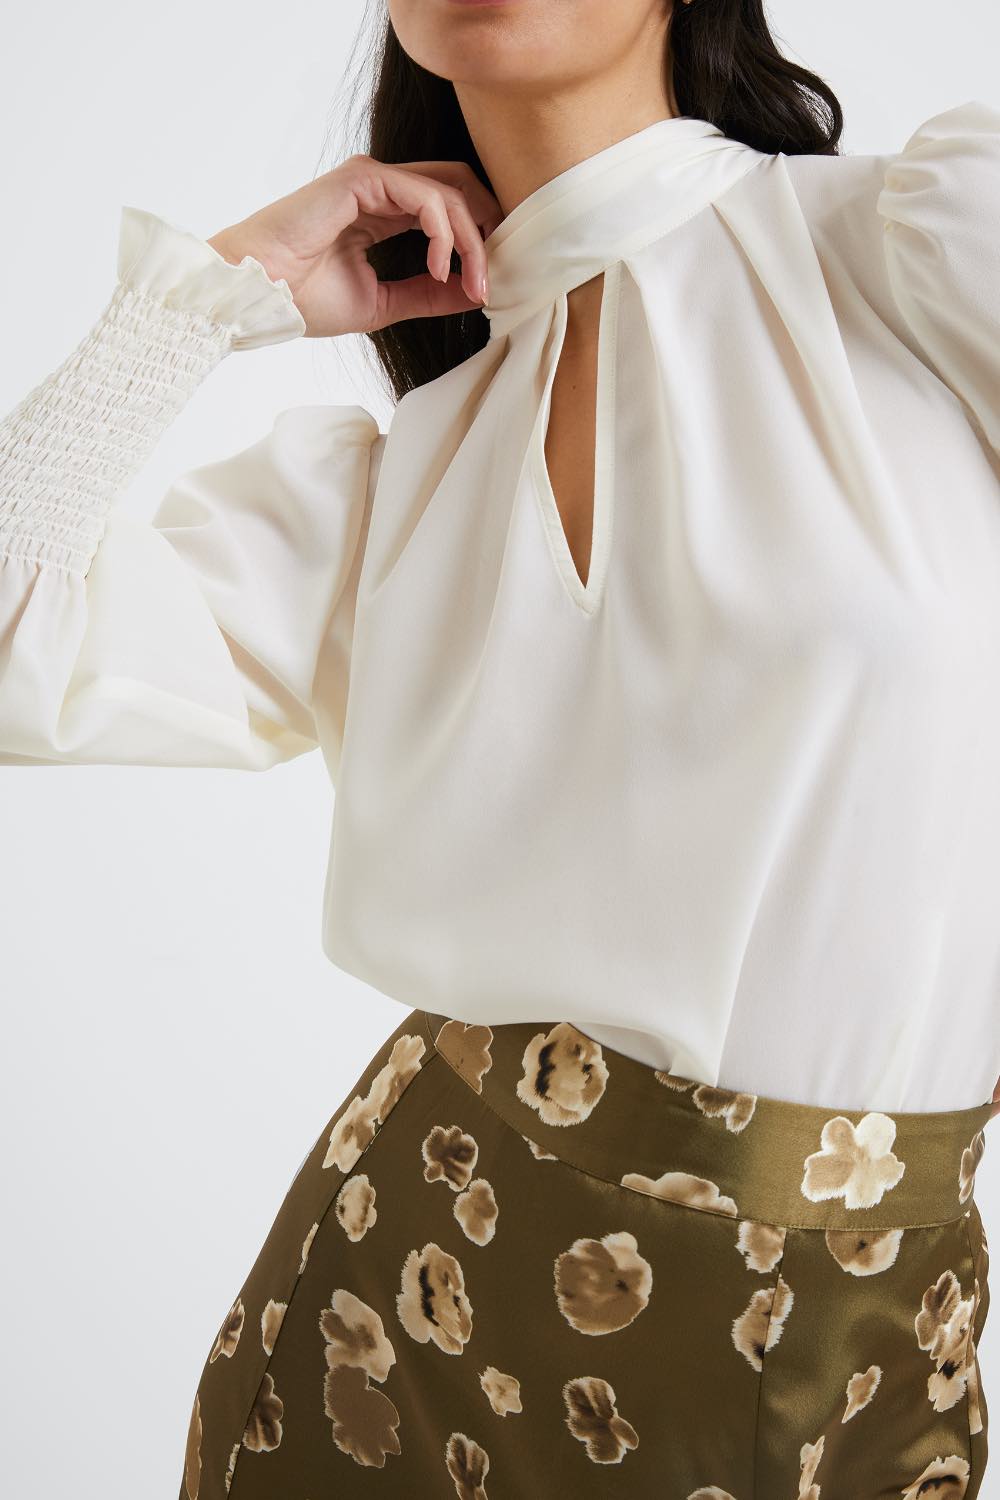 French_Connection_Crepe_Light_Keyhole_Top_Cream_72VCK_DJV_Boutique